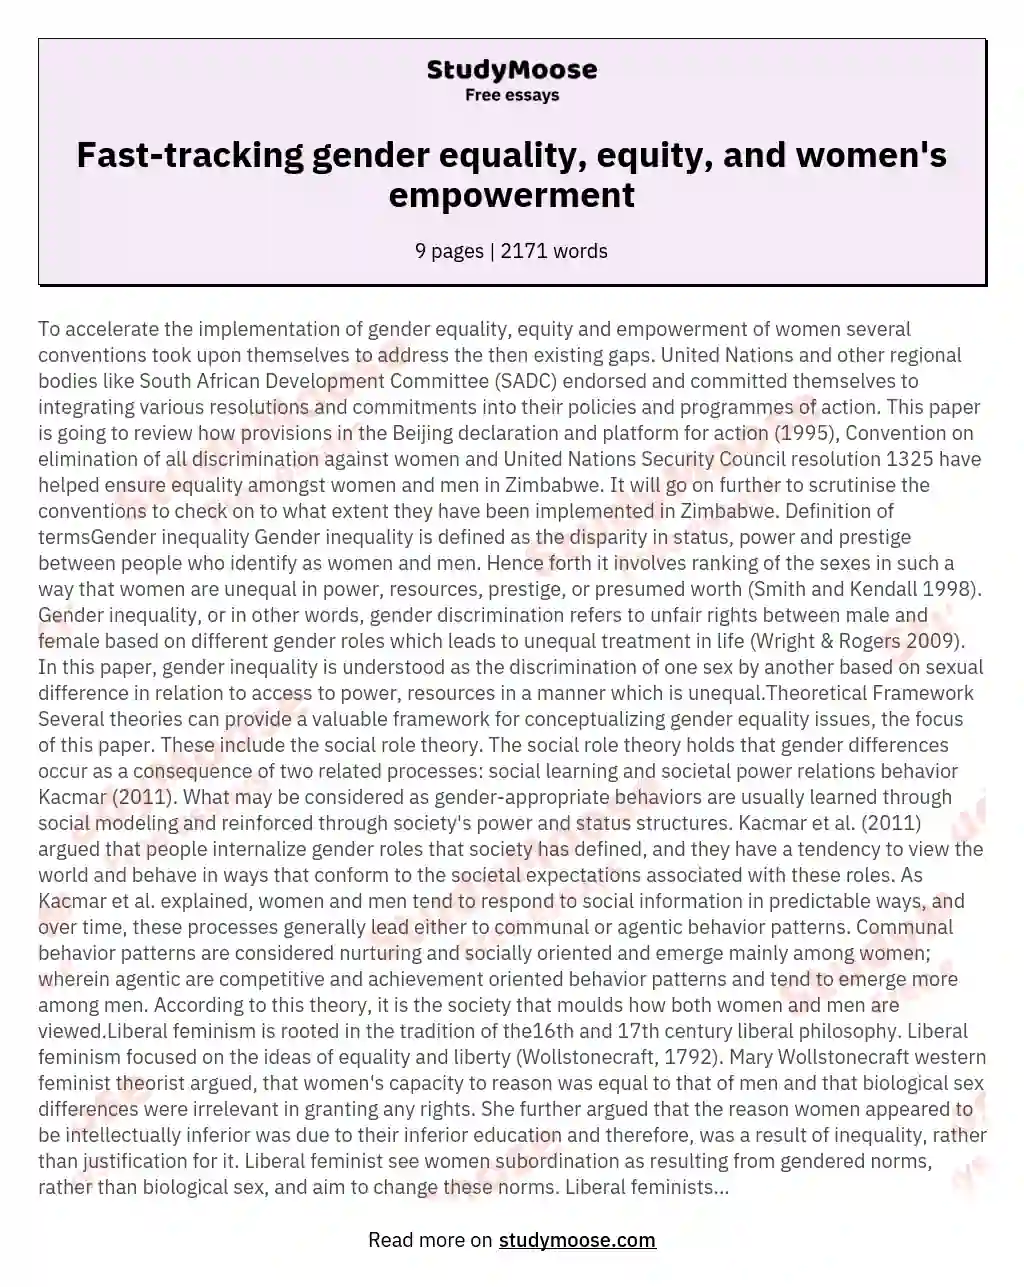 To accelerate the implementation of gender equality equity and empowerment of women